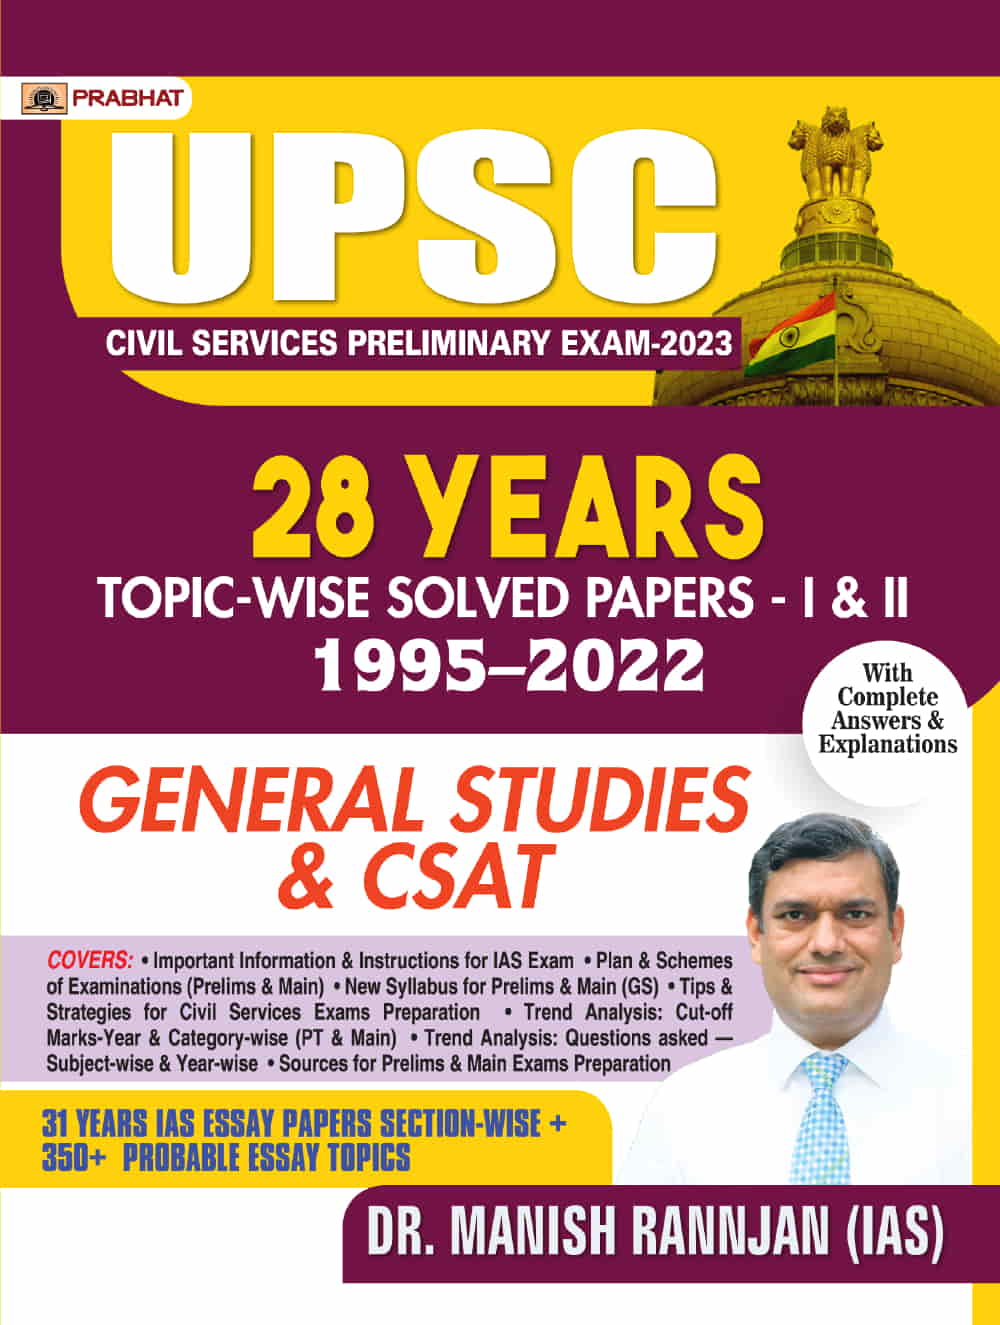 UPSC Civil Services Preliminary Exam-2023, 28 Years Topic-wise Solved Papers 1995–2022 General Studies & CSAT Paper-I & II